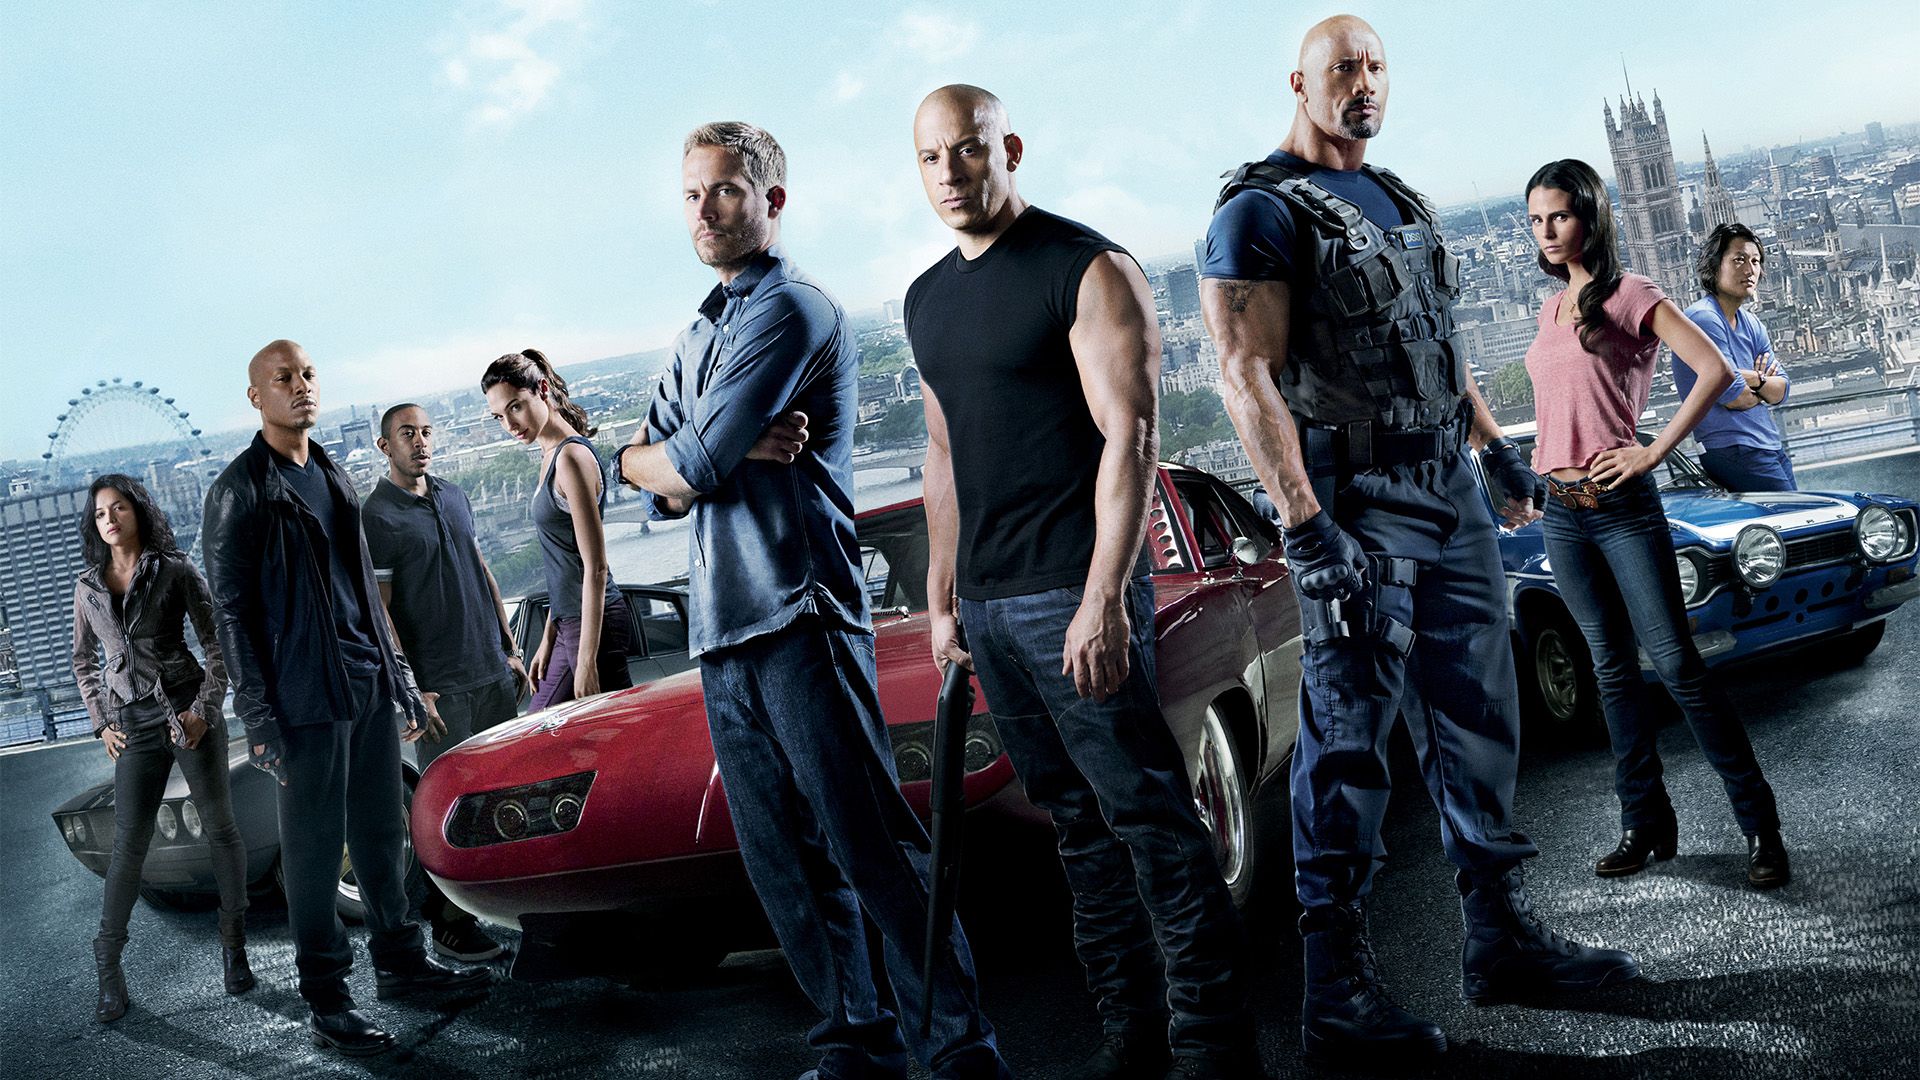 Fast & Furious 6 background